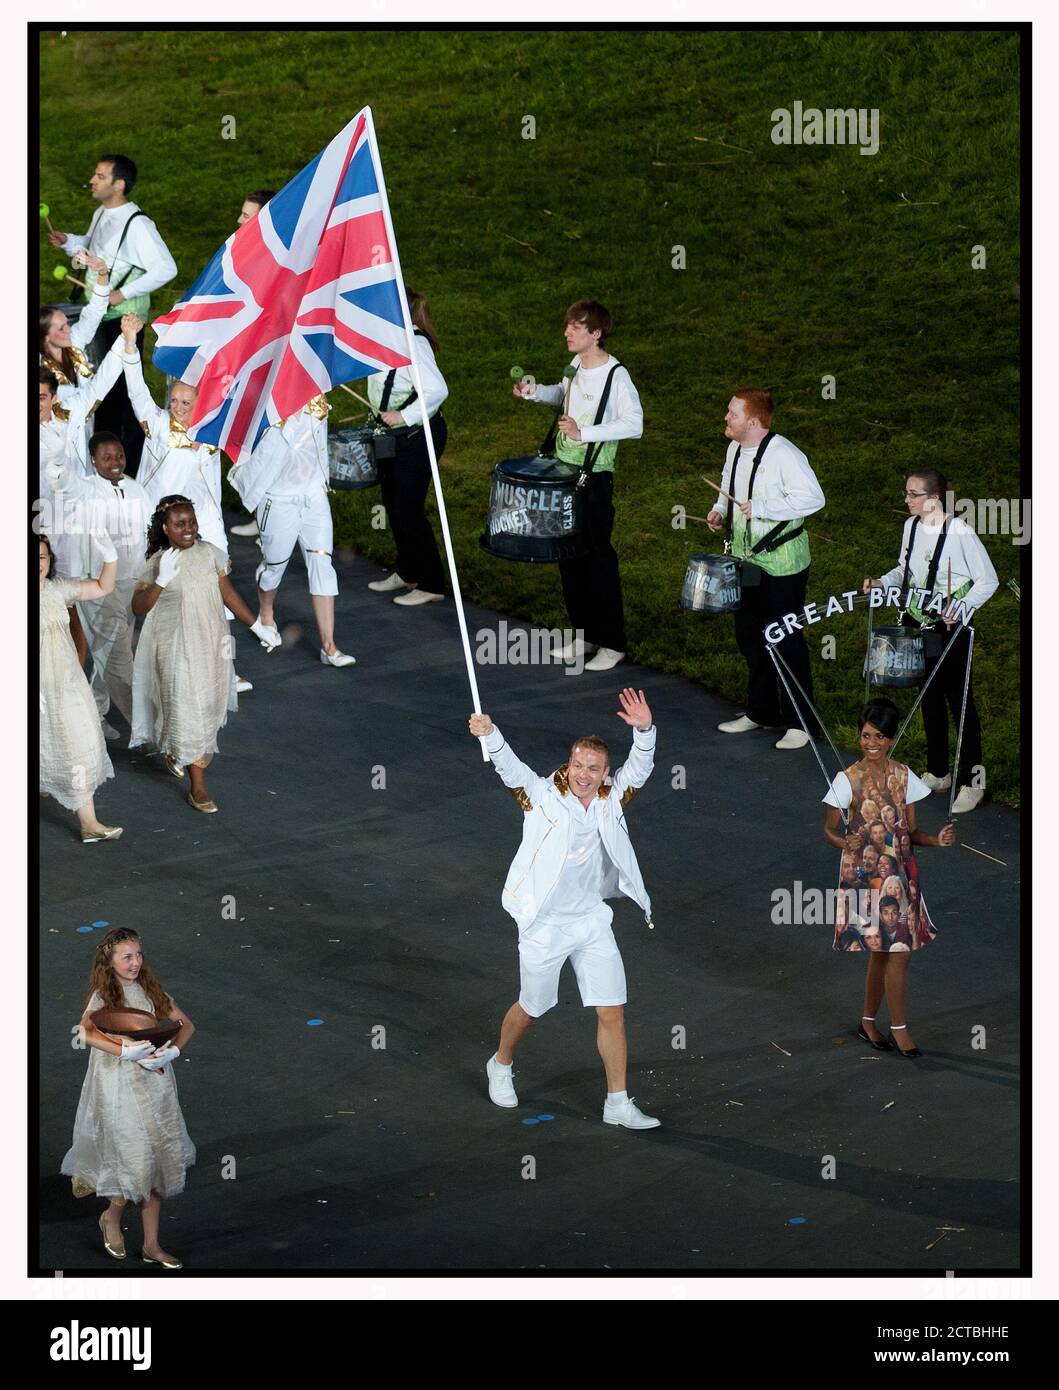 SIR CHRIS HOY CARRIES THE GB FLAG AND LEADS TEAM GB INTO THE STADIUM DURING OPENING CEREMONY OF THE LONDON 2012 OLYMPICS PICTURE : MARK PAIN / ALAMY Stock Photo